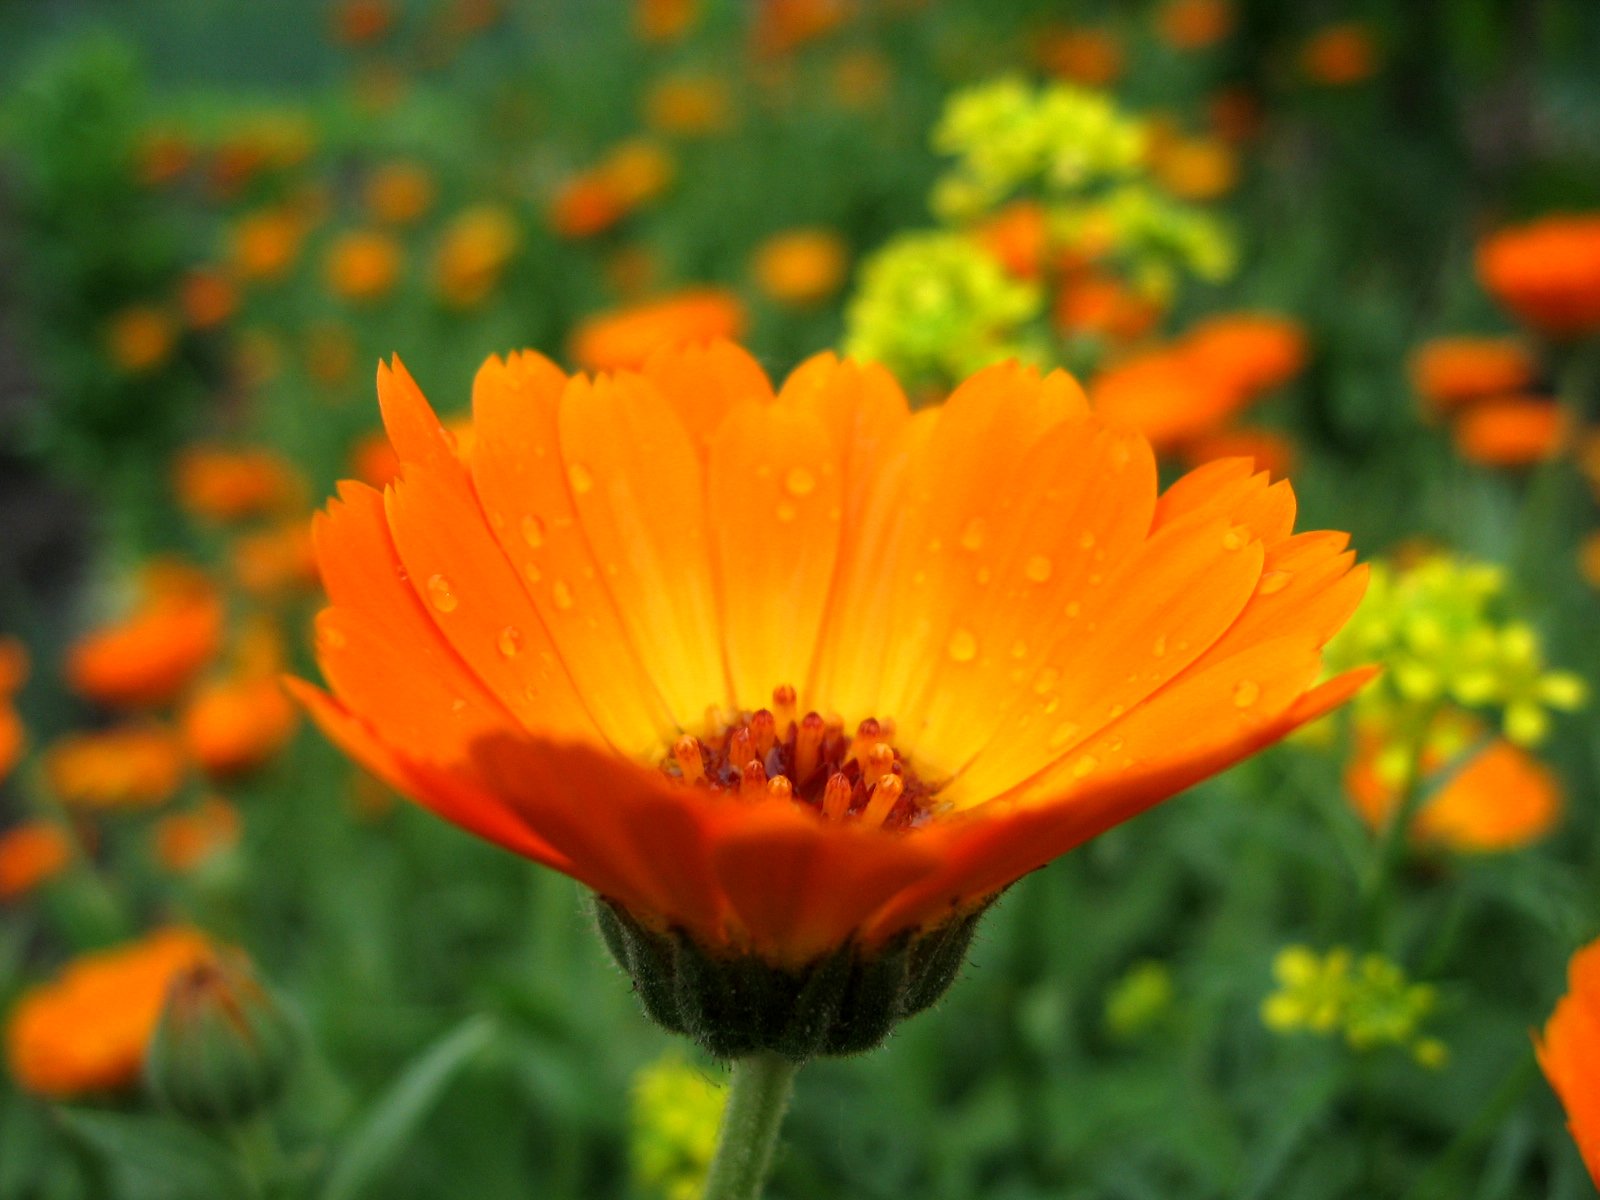 an orange flower in a field covered in water droplets